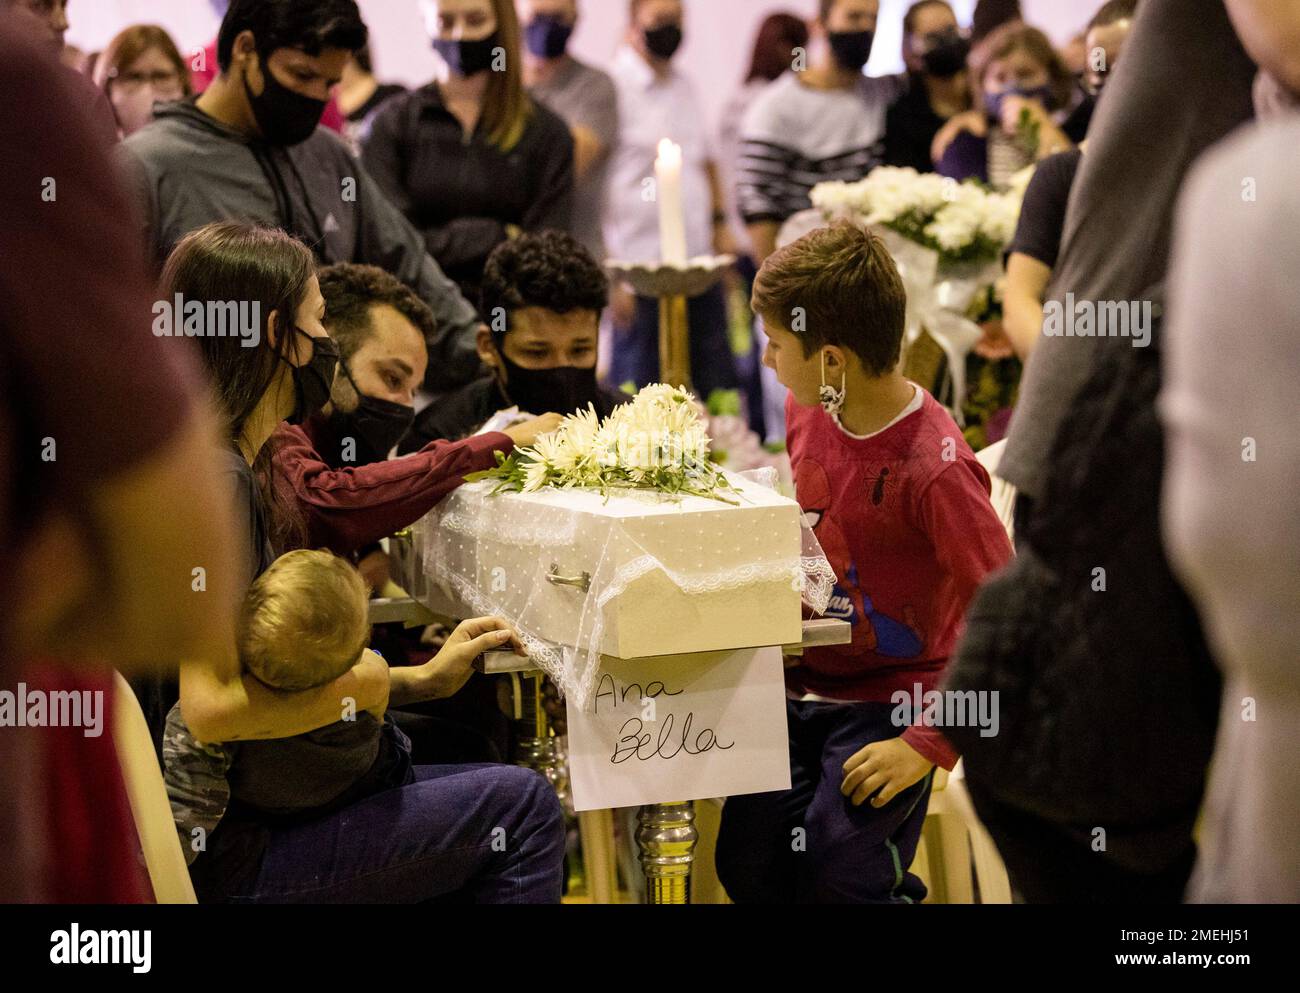 https://c8.alamy.com/comp/2MEHJ51/relatives-pay-their-final-respects-to-1-year-old-ana-bella-fernandes-who-was-killed-by-a-knife-wielding-attacker-inside-a-day-care-center-during-a-wake-at-a-city-park-in-saudades-in-the-southern-state-of-santa-catarina-brazil-wednesday-may-5-2021-the-citys-mayor-said-that-a-youth-aged-between-14-and-18-years-old-had-entered-the-day-care-center-tuesday-with-a-knife-killing-three-children-a-teacher-and-a-teachers-assistant-ap-photoliamara-polli-2MEHJ51.jpg